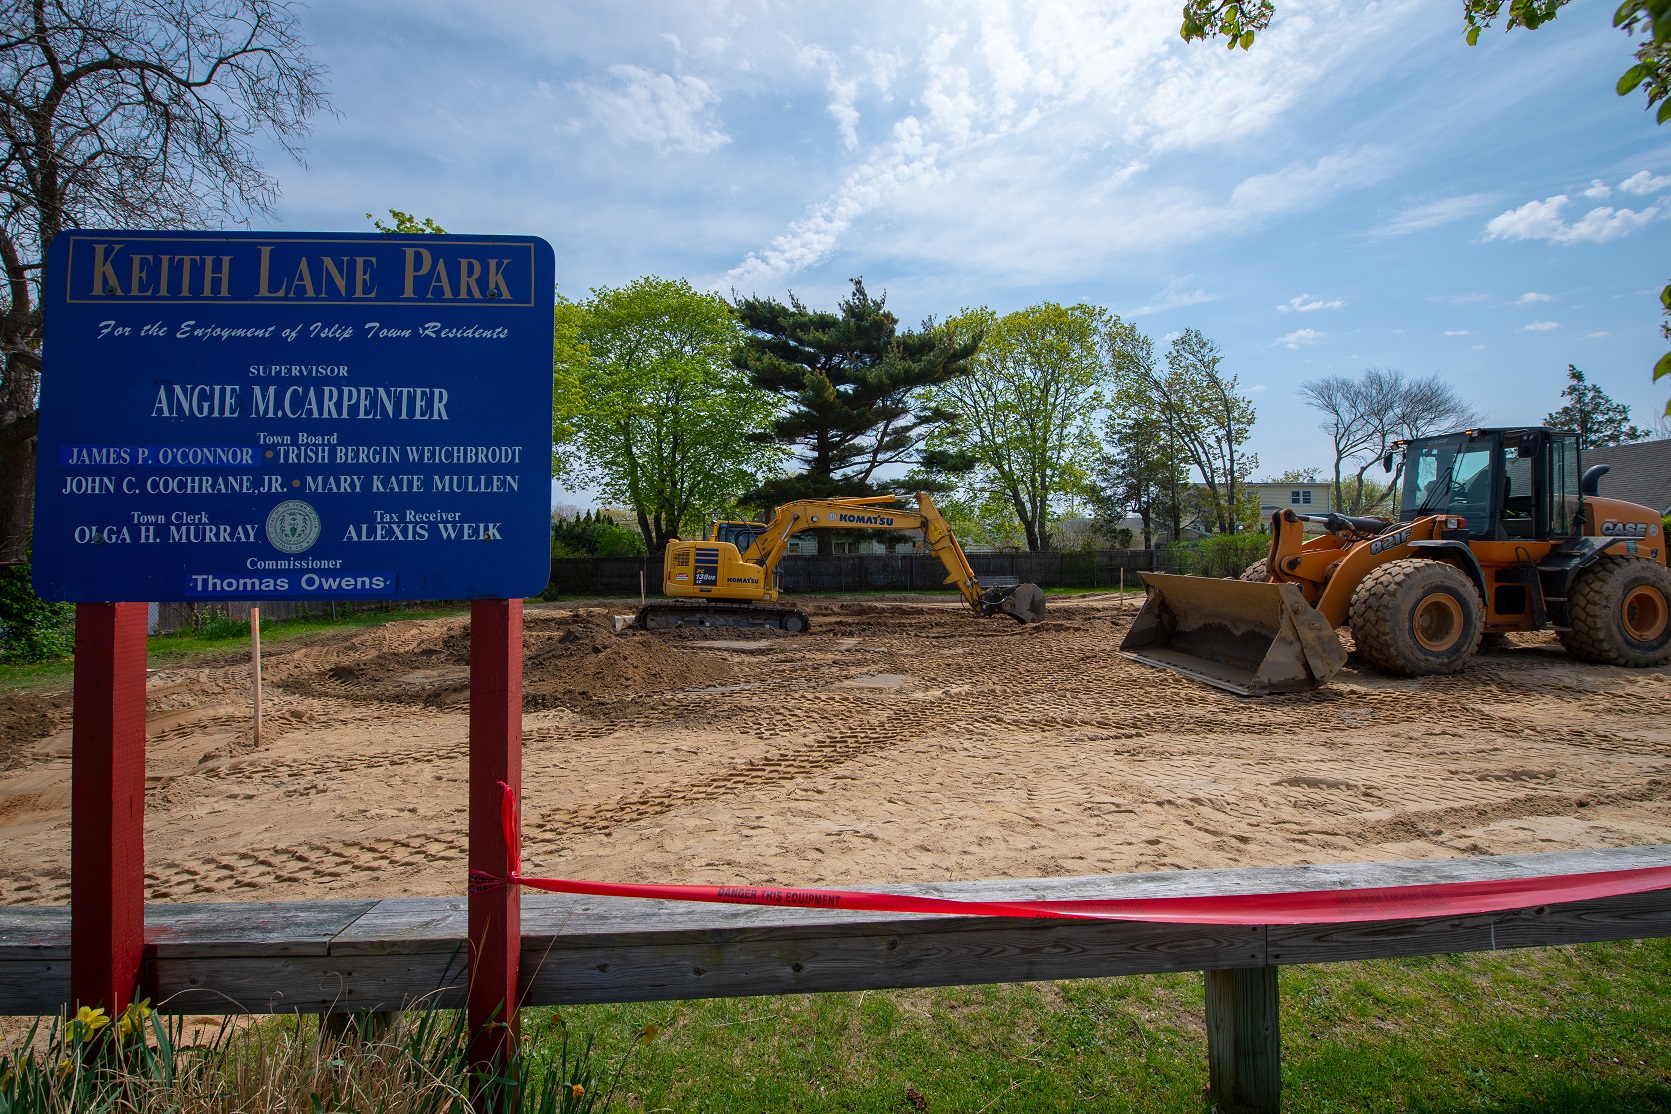 Keith Avenue Park sign in the foreground of the photo, with heavy machinary behind the sign working to clear the land for a new playground to be installed